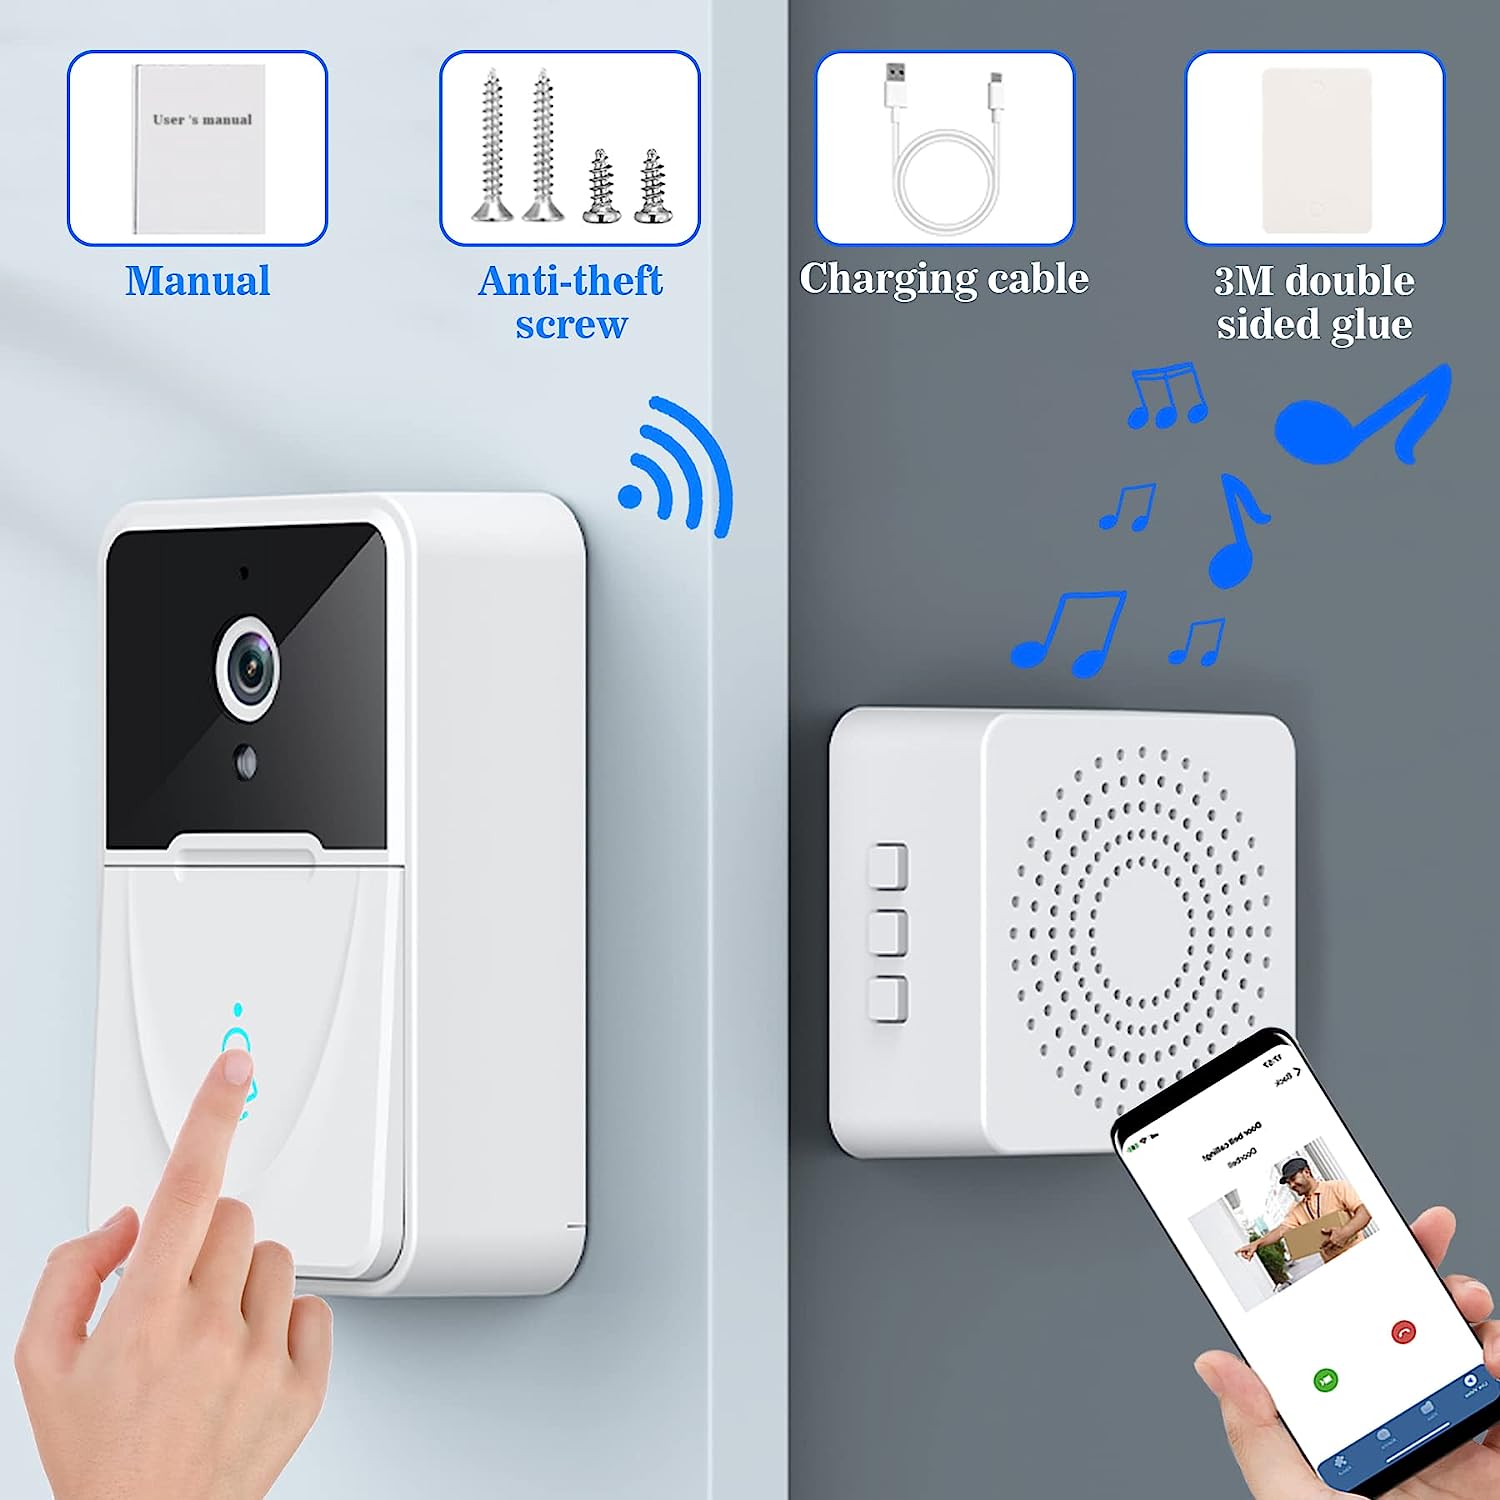 Smart door bell,Video Doorbell, Camera Wireless Intercom Doorbell, Anti-Theft Video Doorbell with Chime, Night Vision 2.4Ghz WiFi, for Houses Apartments Offices